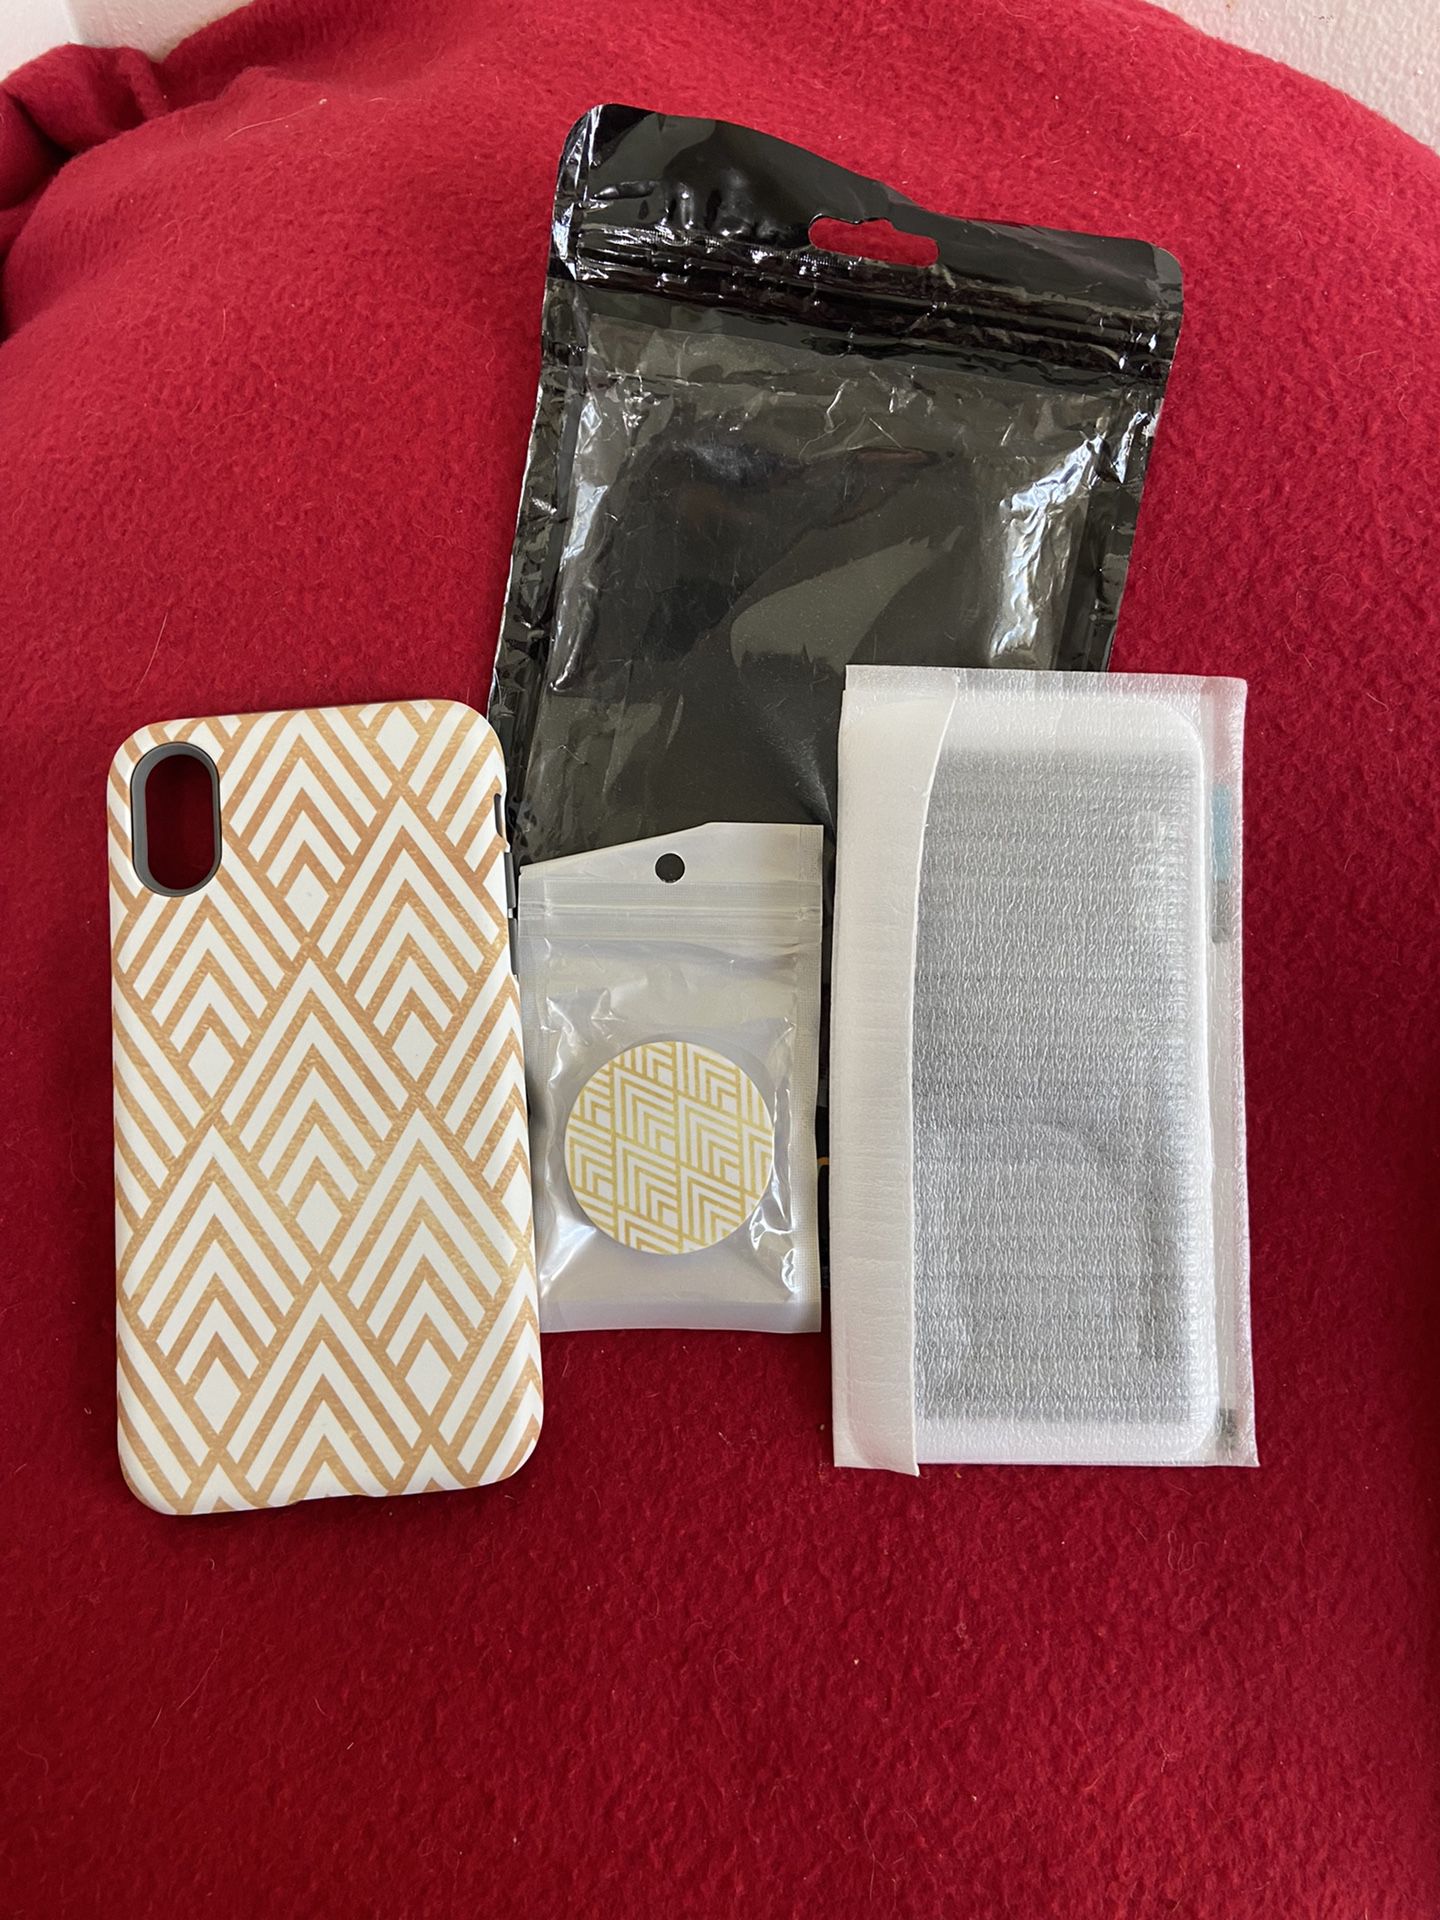 Iphone X/XS Screen Protector, matte Case And Cellphone Grip With Gold Diamonds Design/New